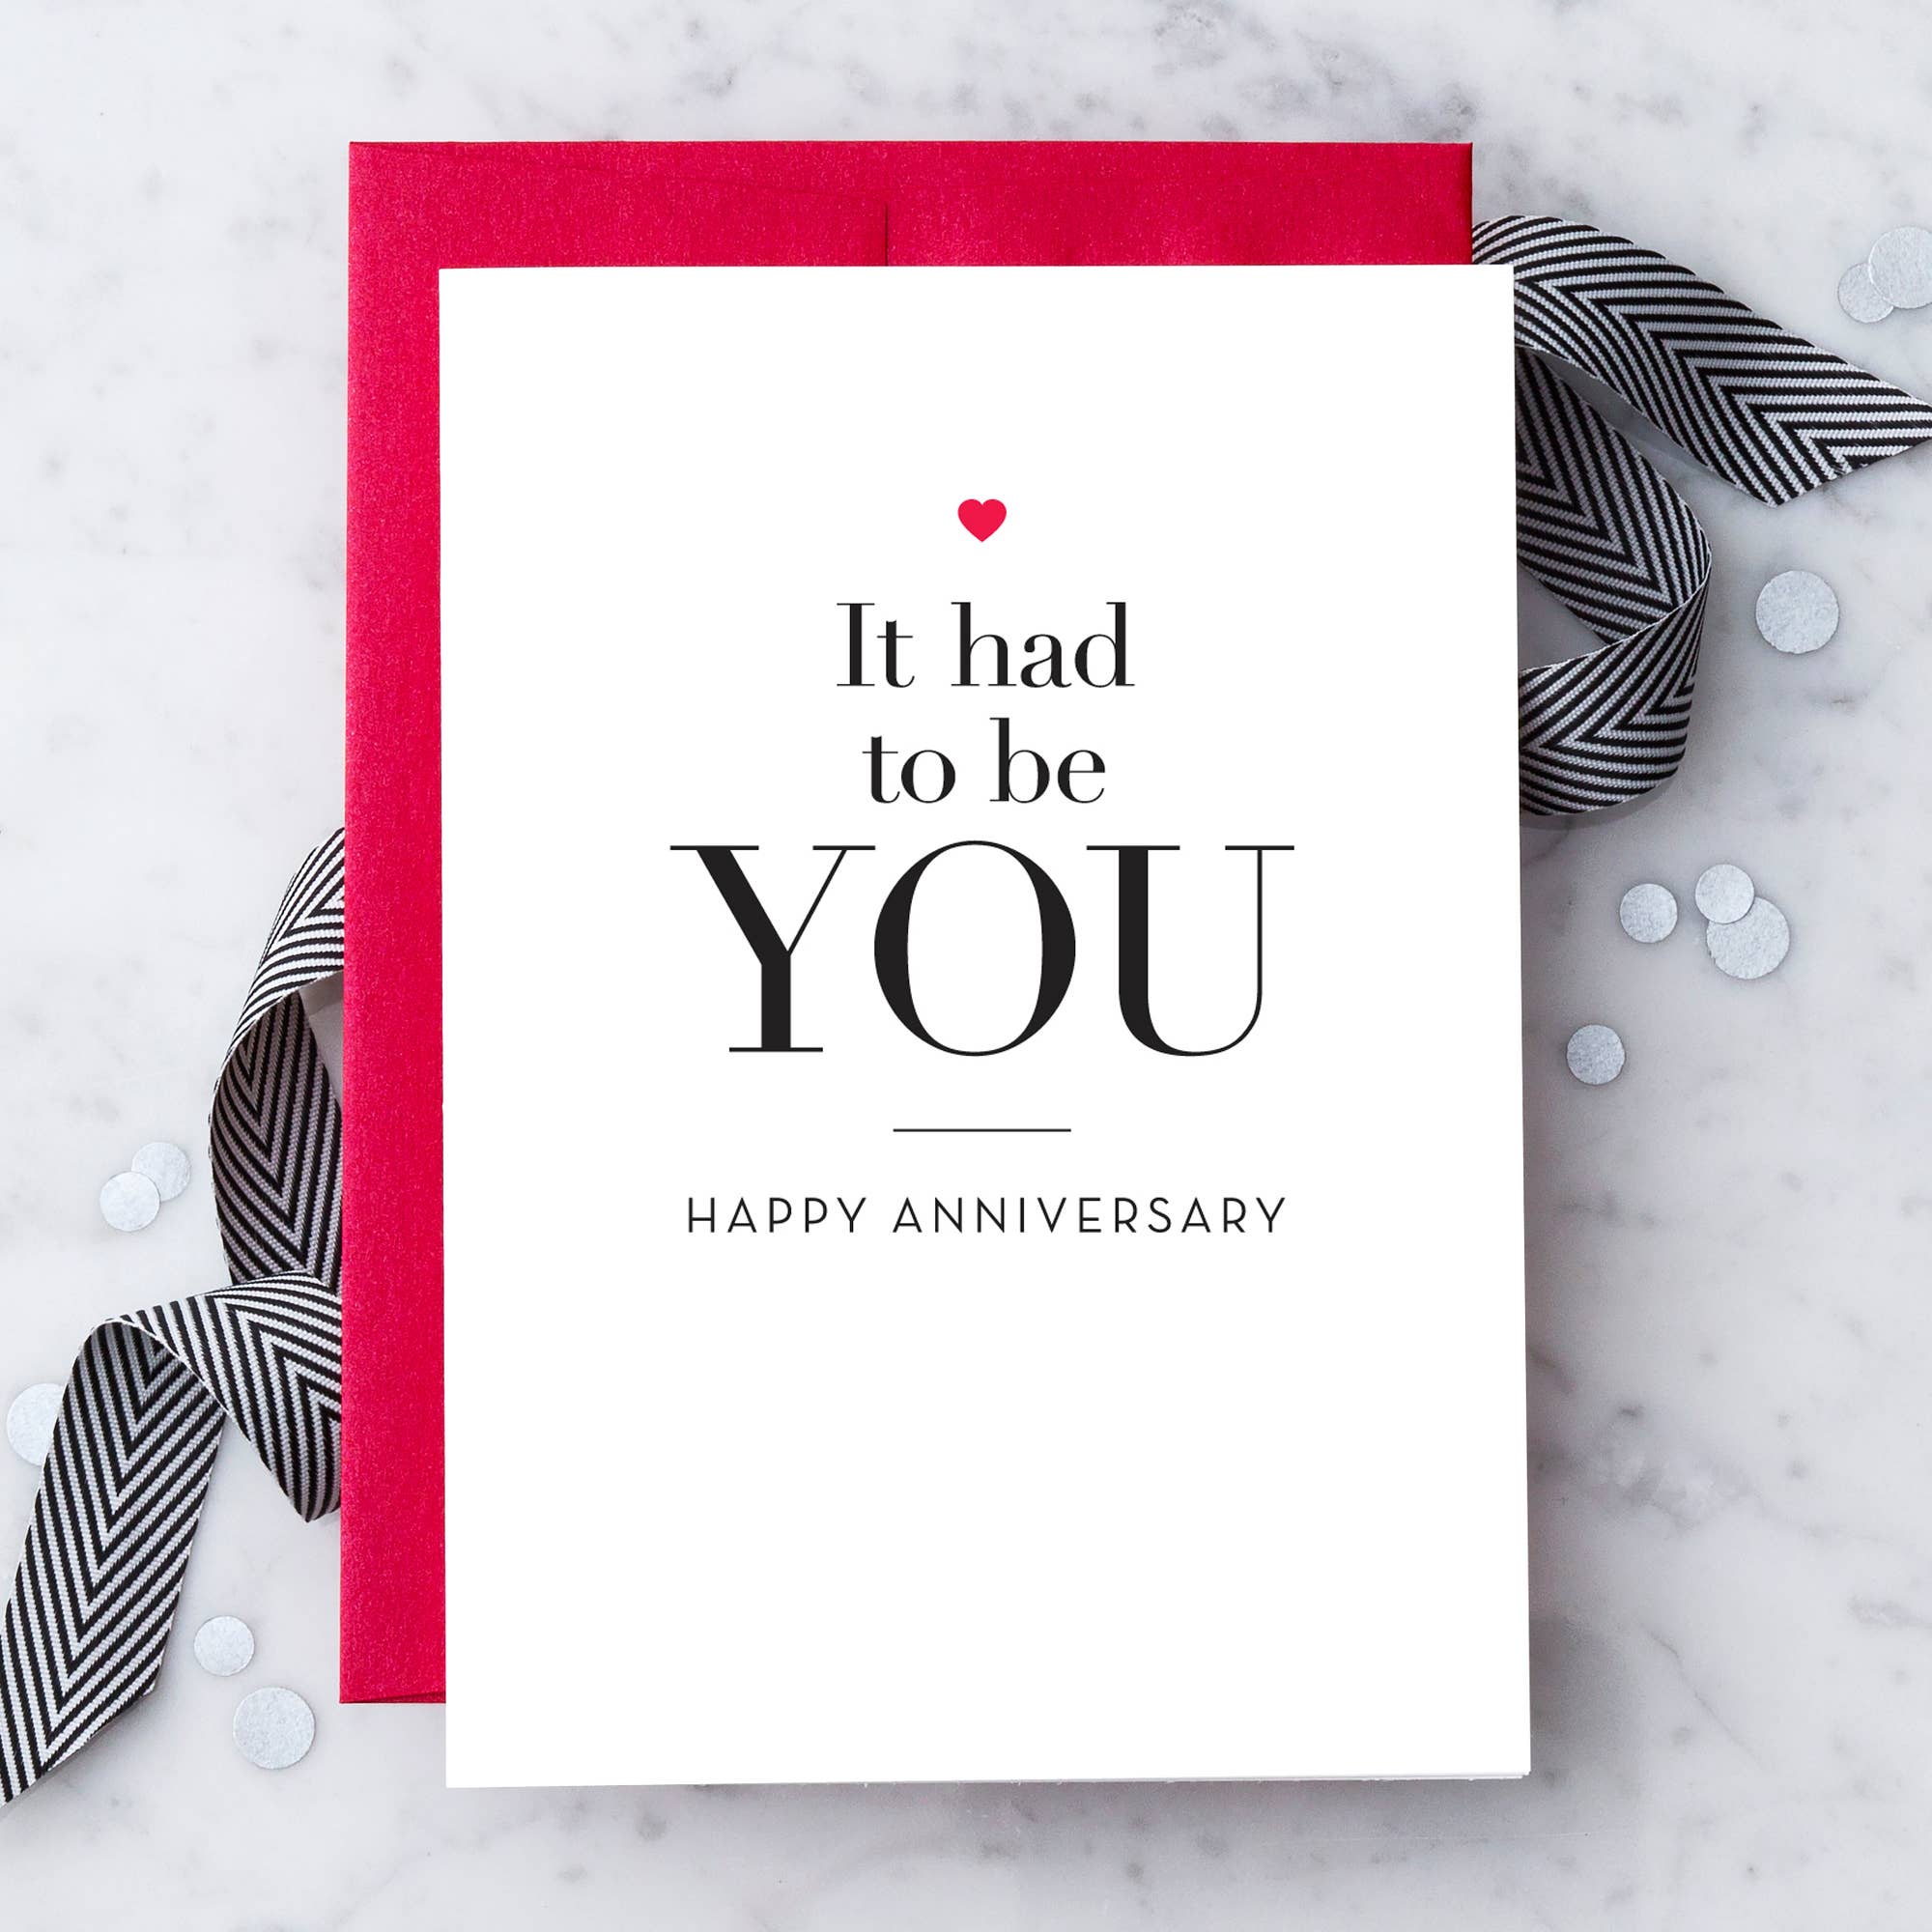 "It had to be you. Happy Anniversary" Greeting Card.